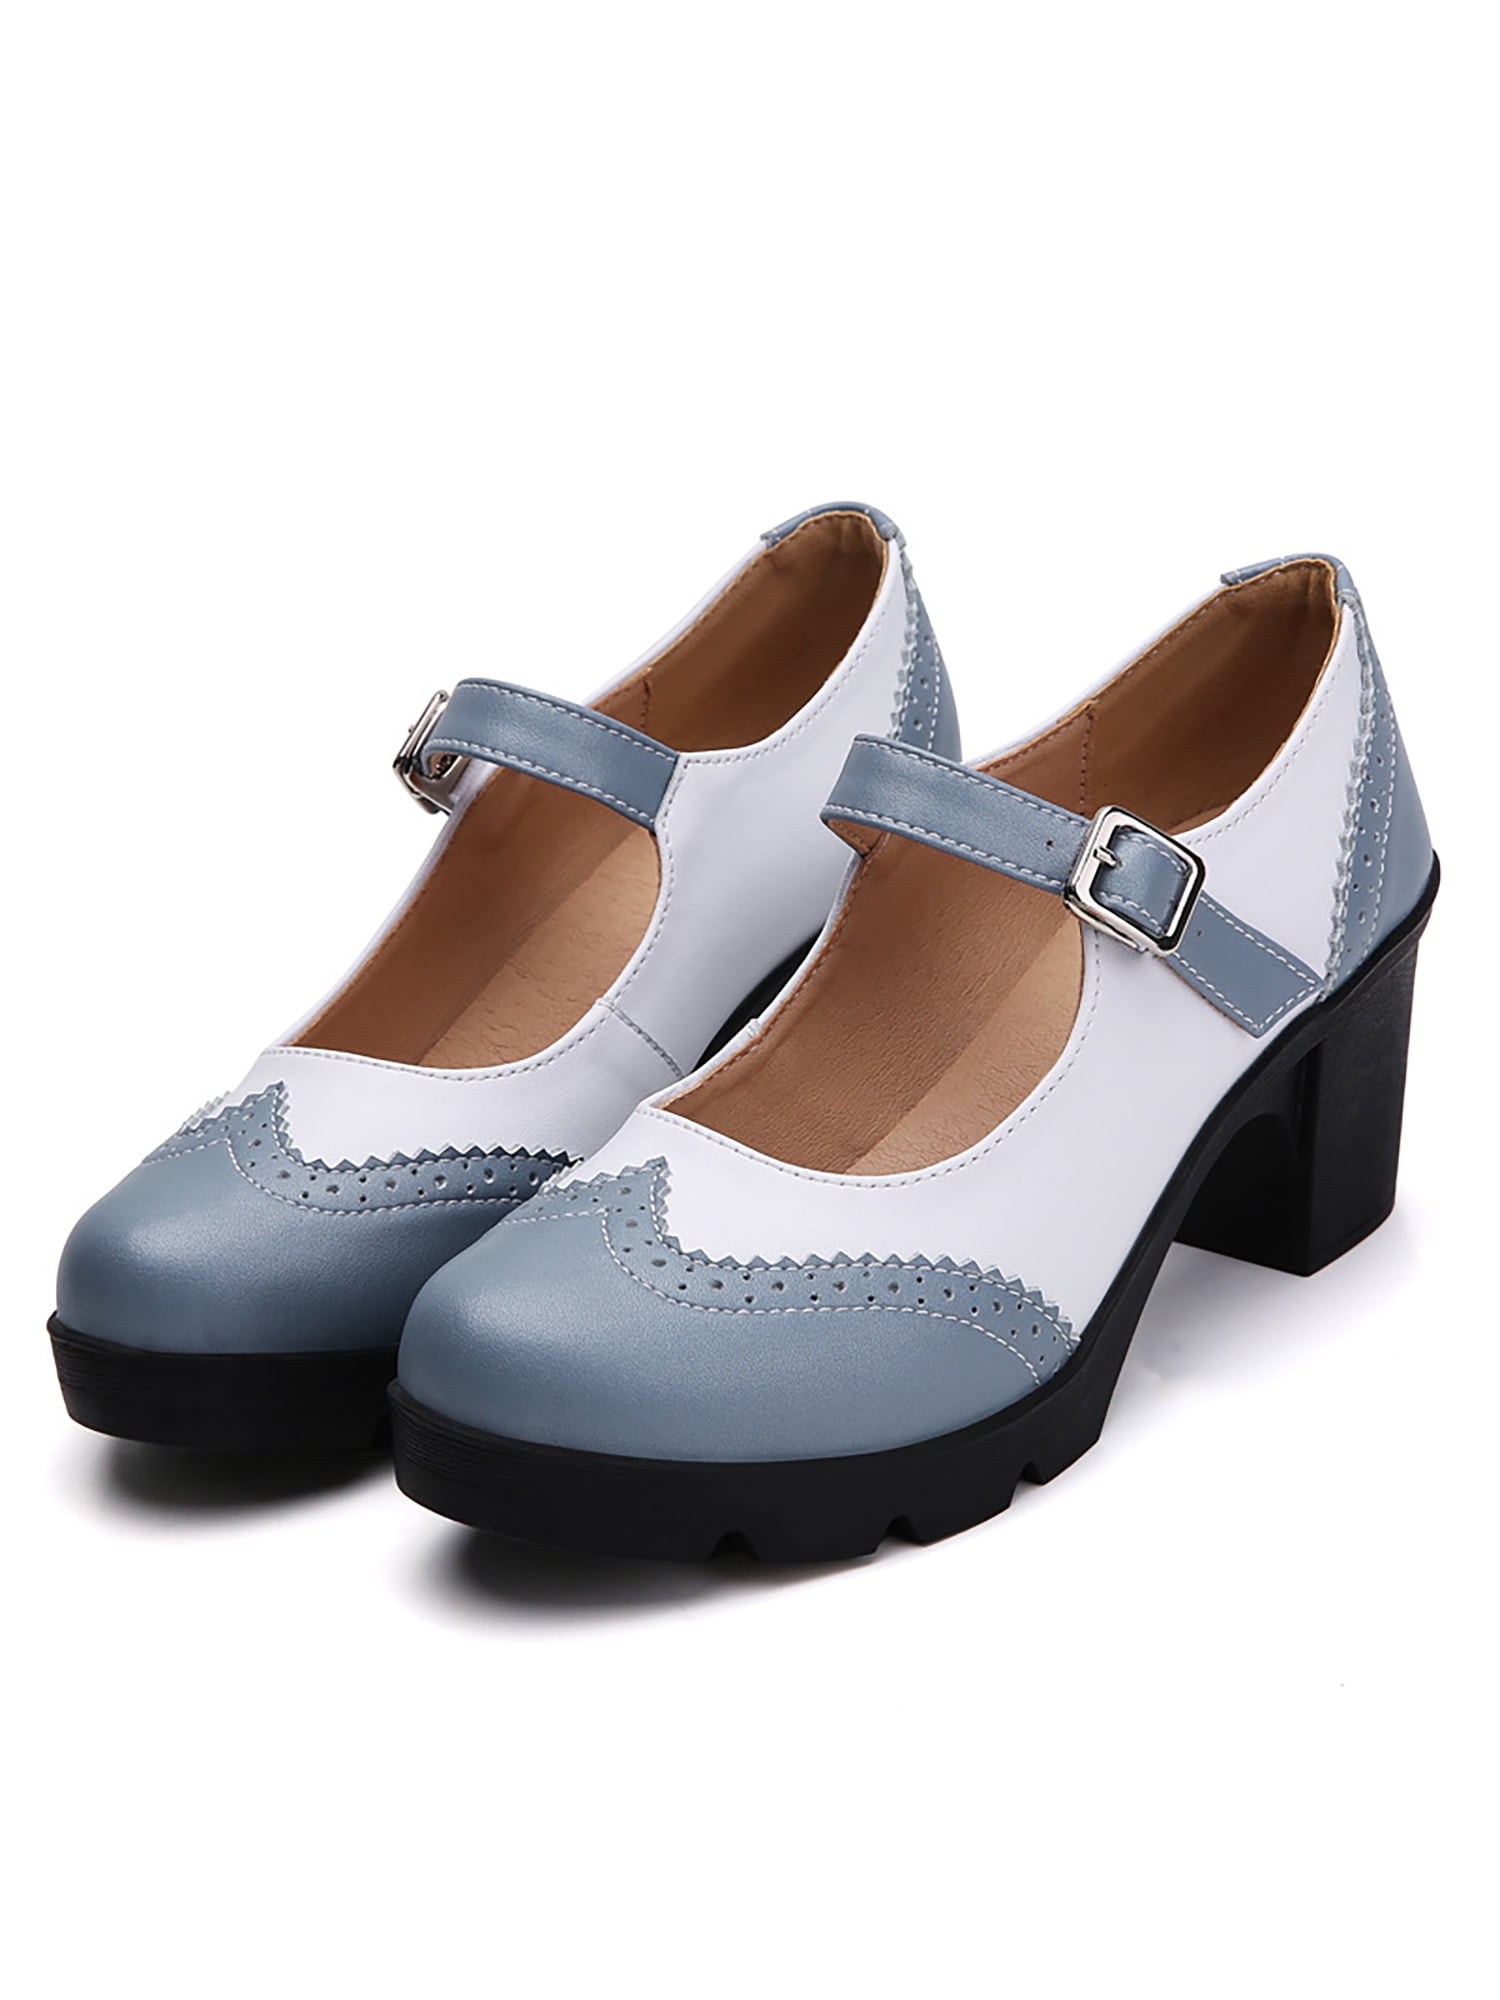 Details about   Retro Ladies Mary Jane Pumps Block Heels Ankle Strap Casual Party Shoes Cosplay 